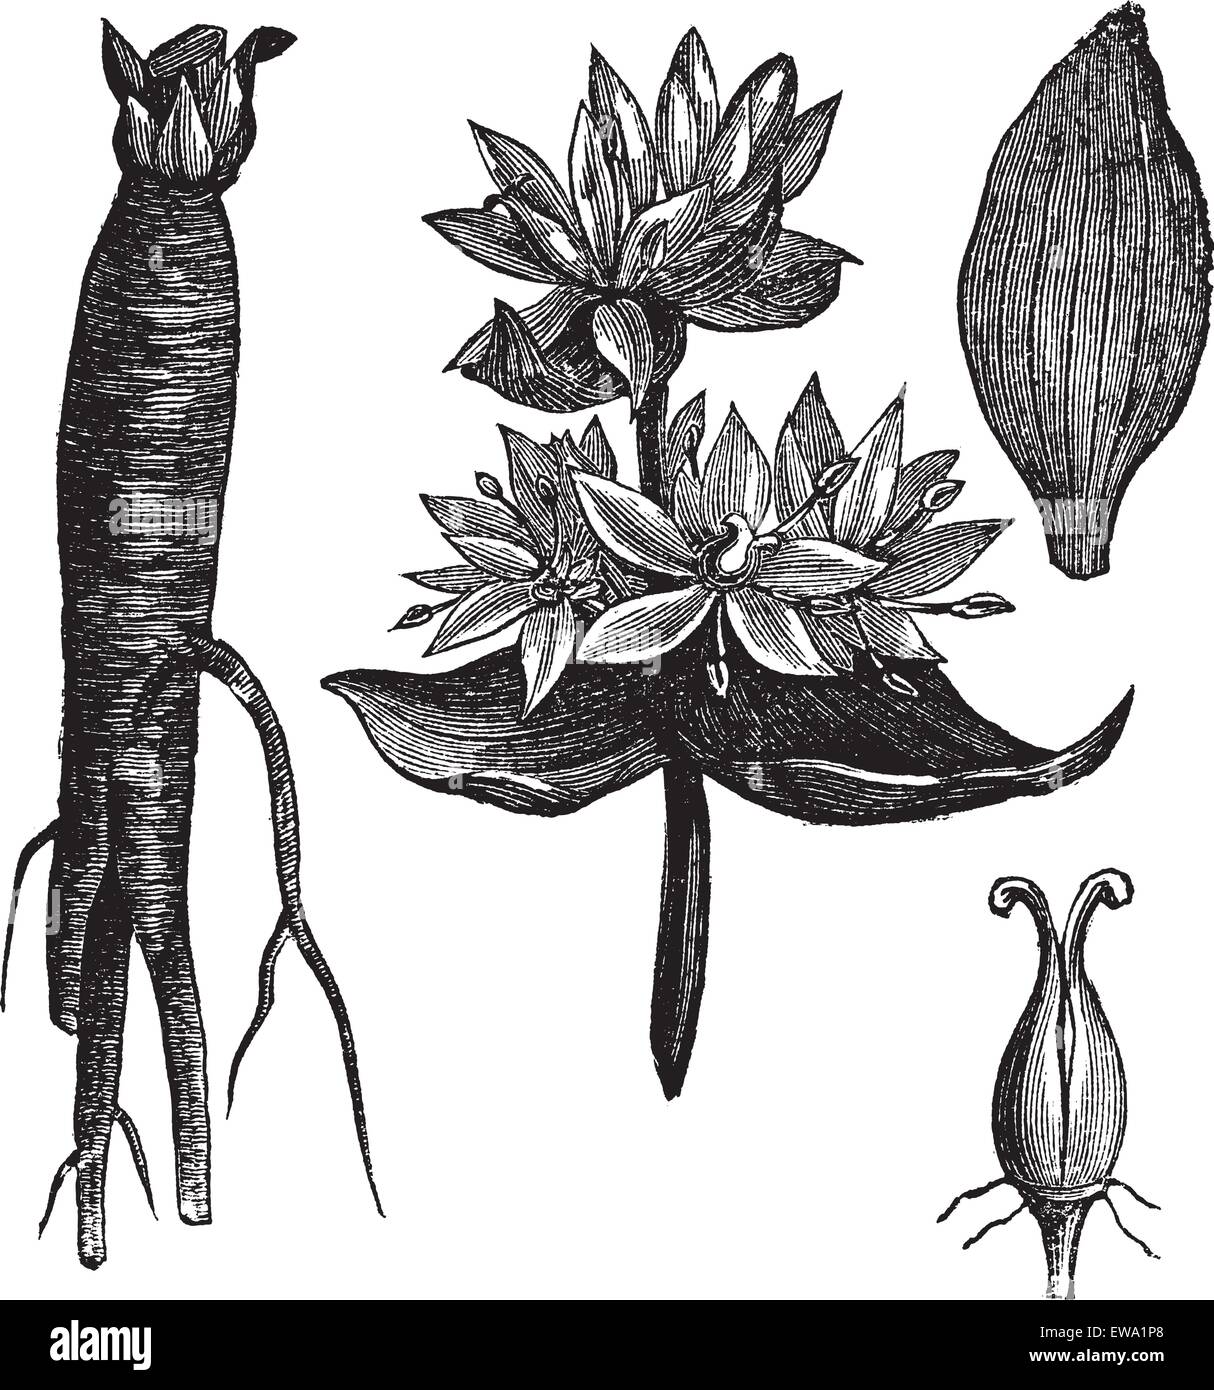 Great Yellow Gentian or Gentiana lutea or Yellow Gentian or Bitter Root or Bitterwort or Centiyane or Genciana, vintage engraving. Old engraved illustration of Great Yellow Gentian, flowers and leaves isolated on a white background. Stock Vector